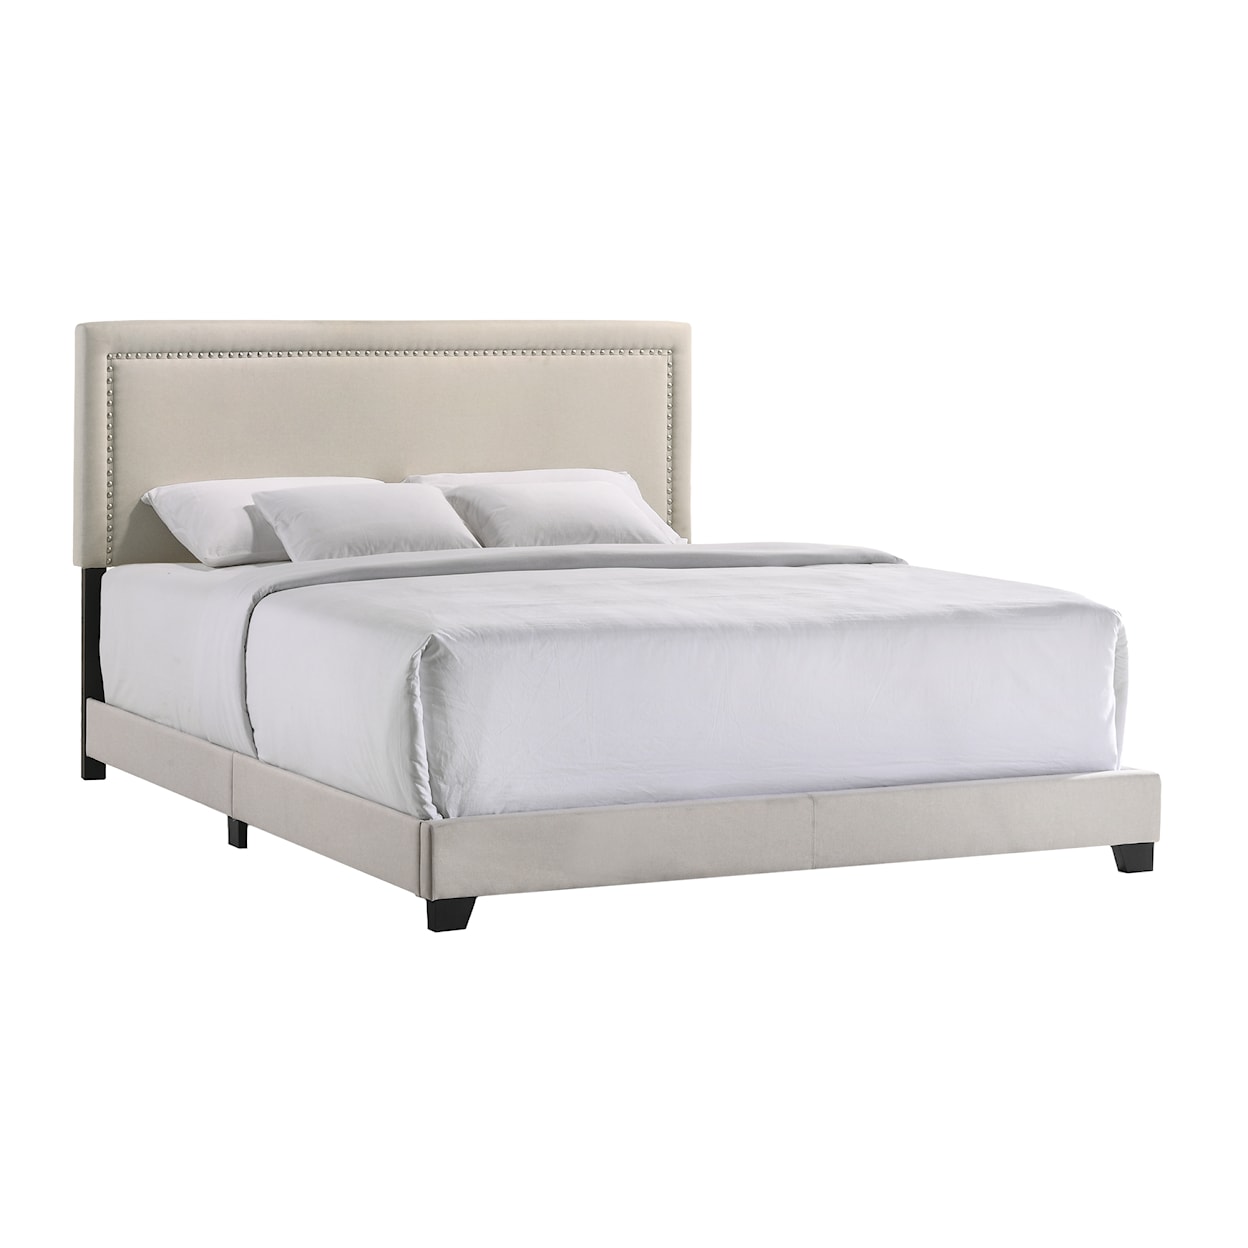 Intercon Upholstered Beds Zion King Upholstered Bed